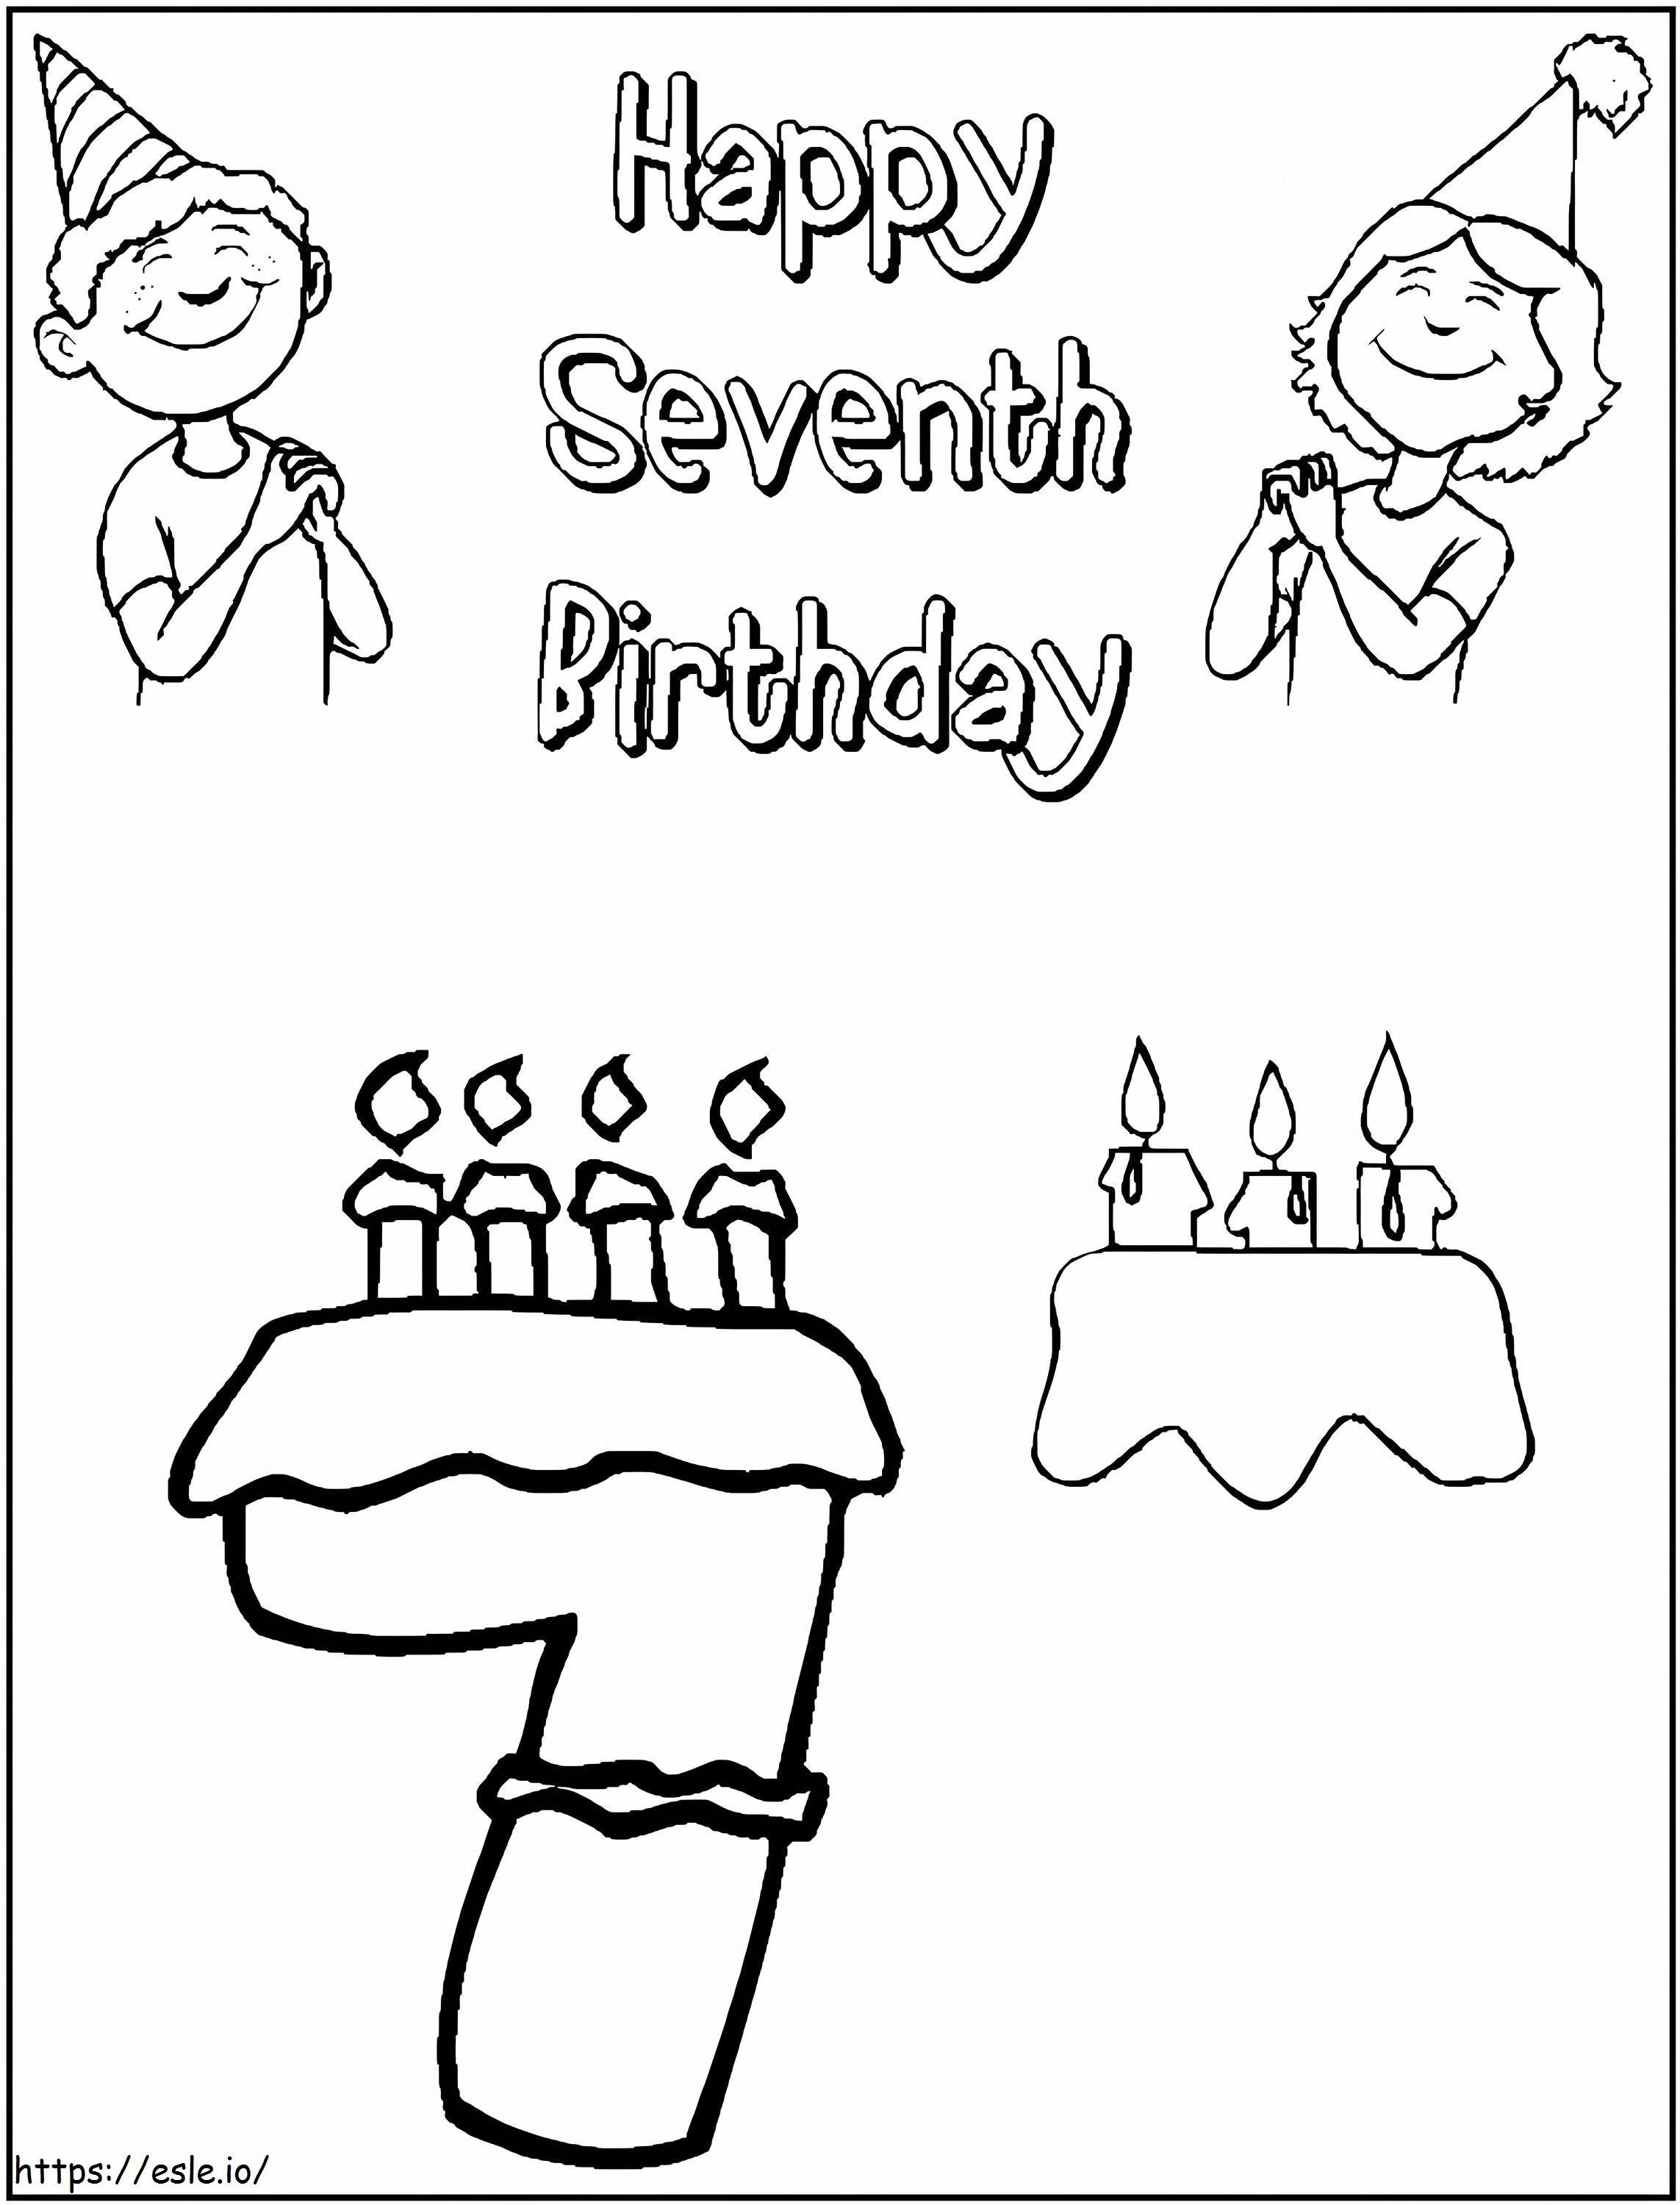  Dinosaur Birthday Coloringages Freerintable Coloring For Seventh Fantastic Image Inspirations da colorare